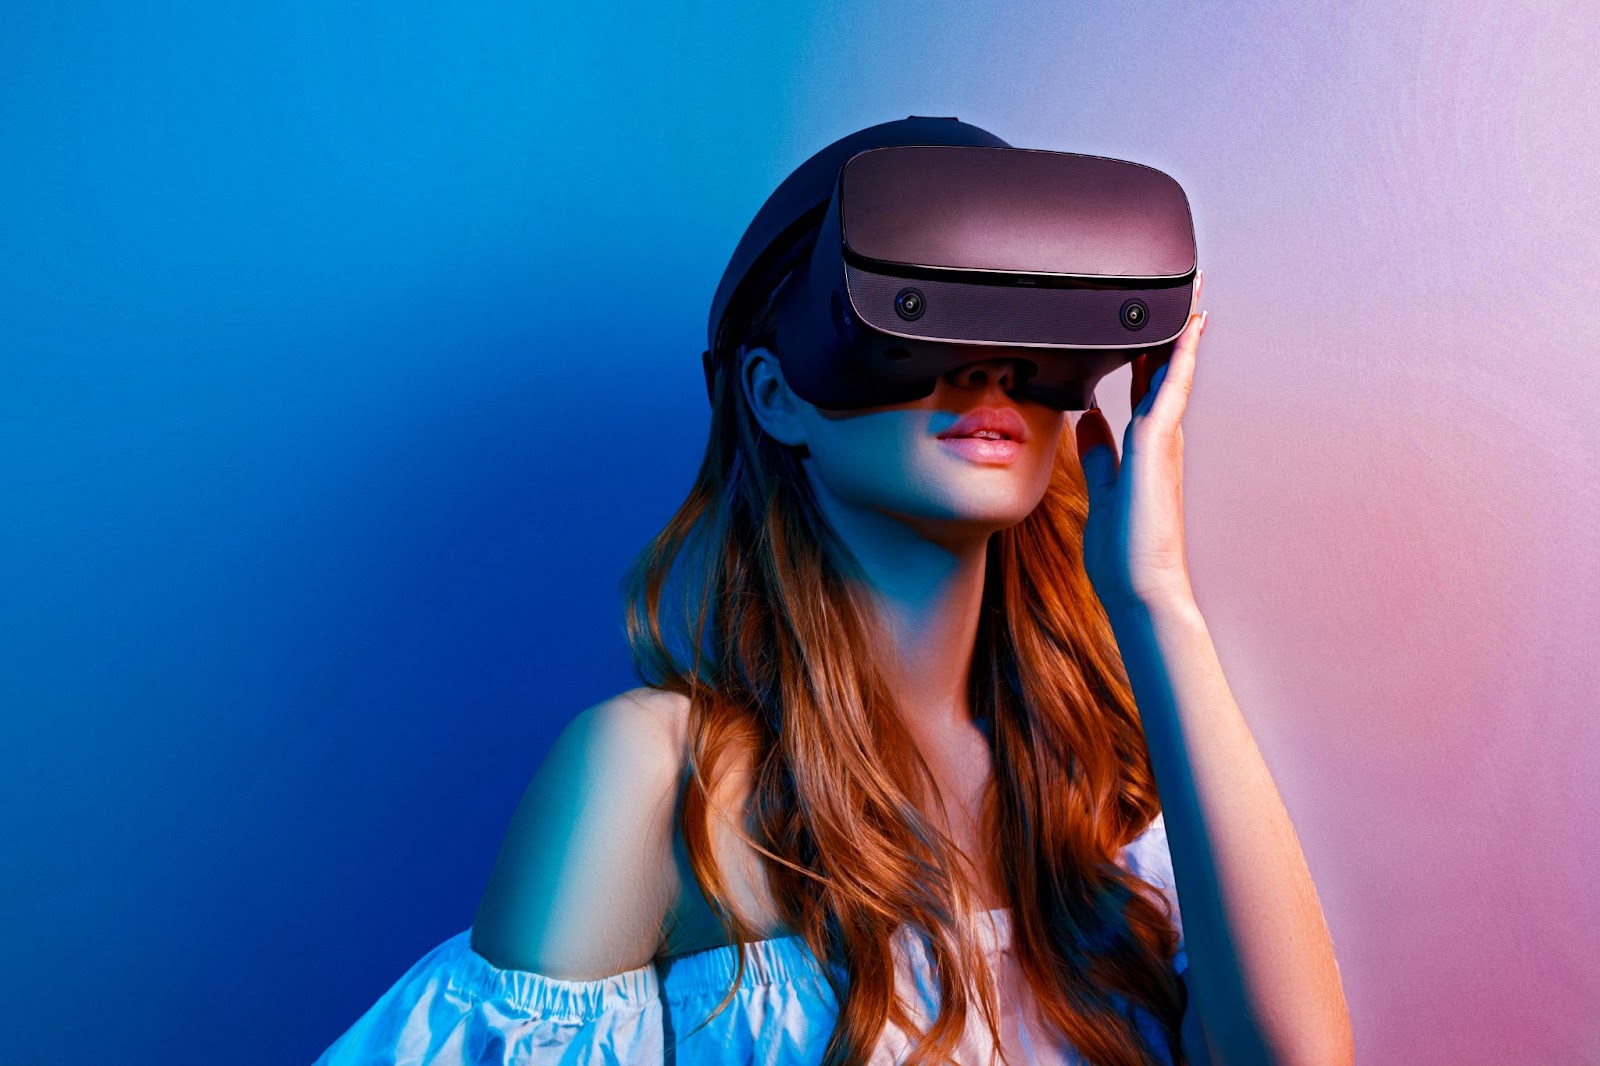 A woman immersed in a virtual reality experience with a headset on.